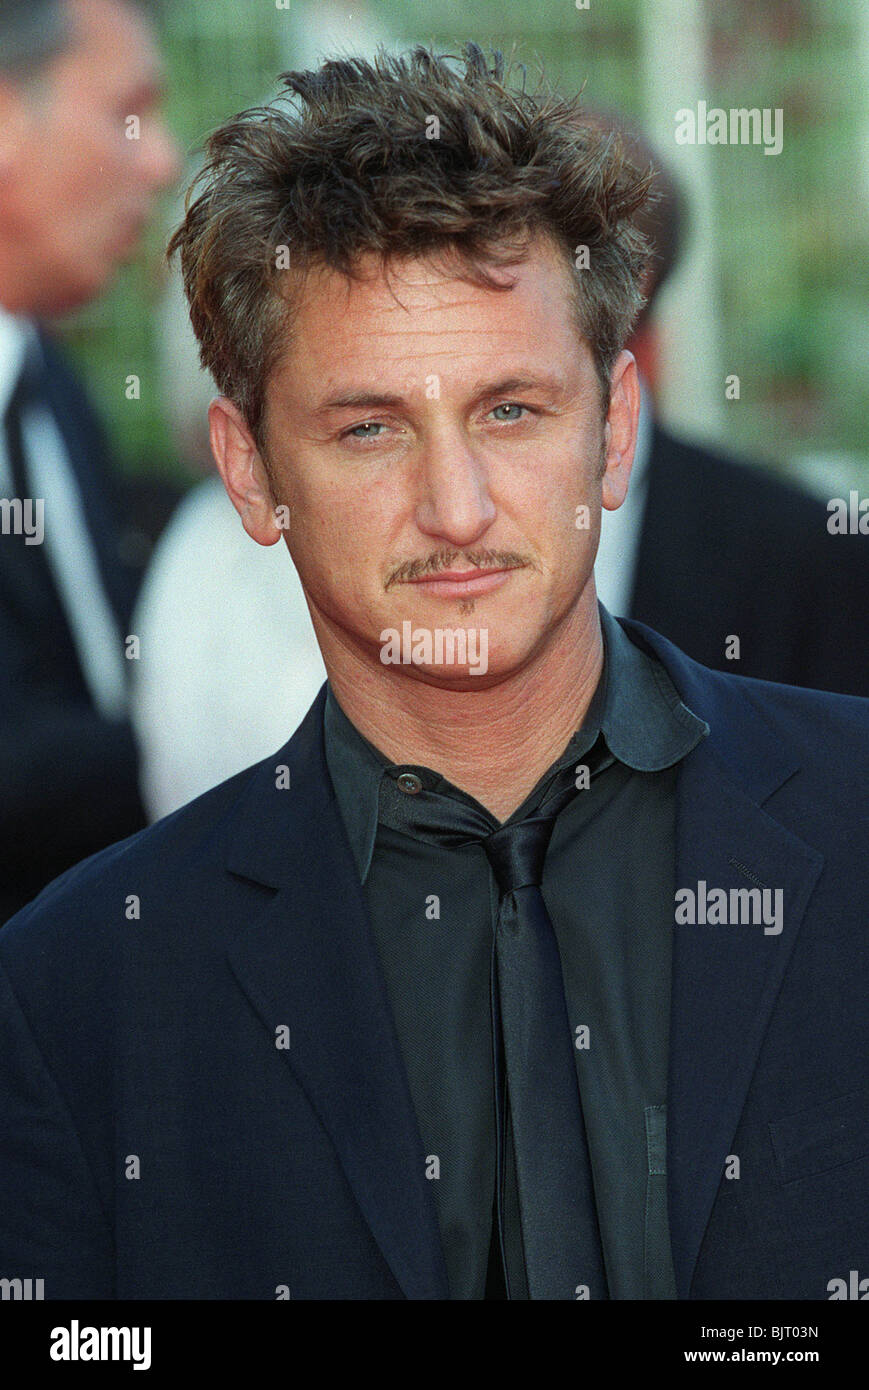 SEAN PENN CANNES FILM FESTIVAL CANNES FRANCE EUROPE 15 May 2001 Stock Photo